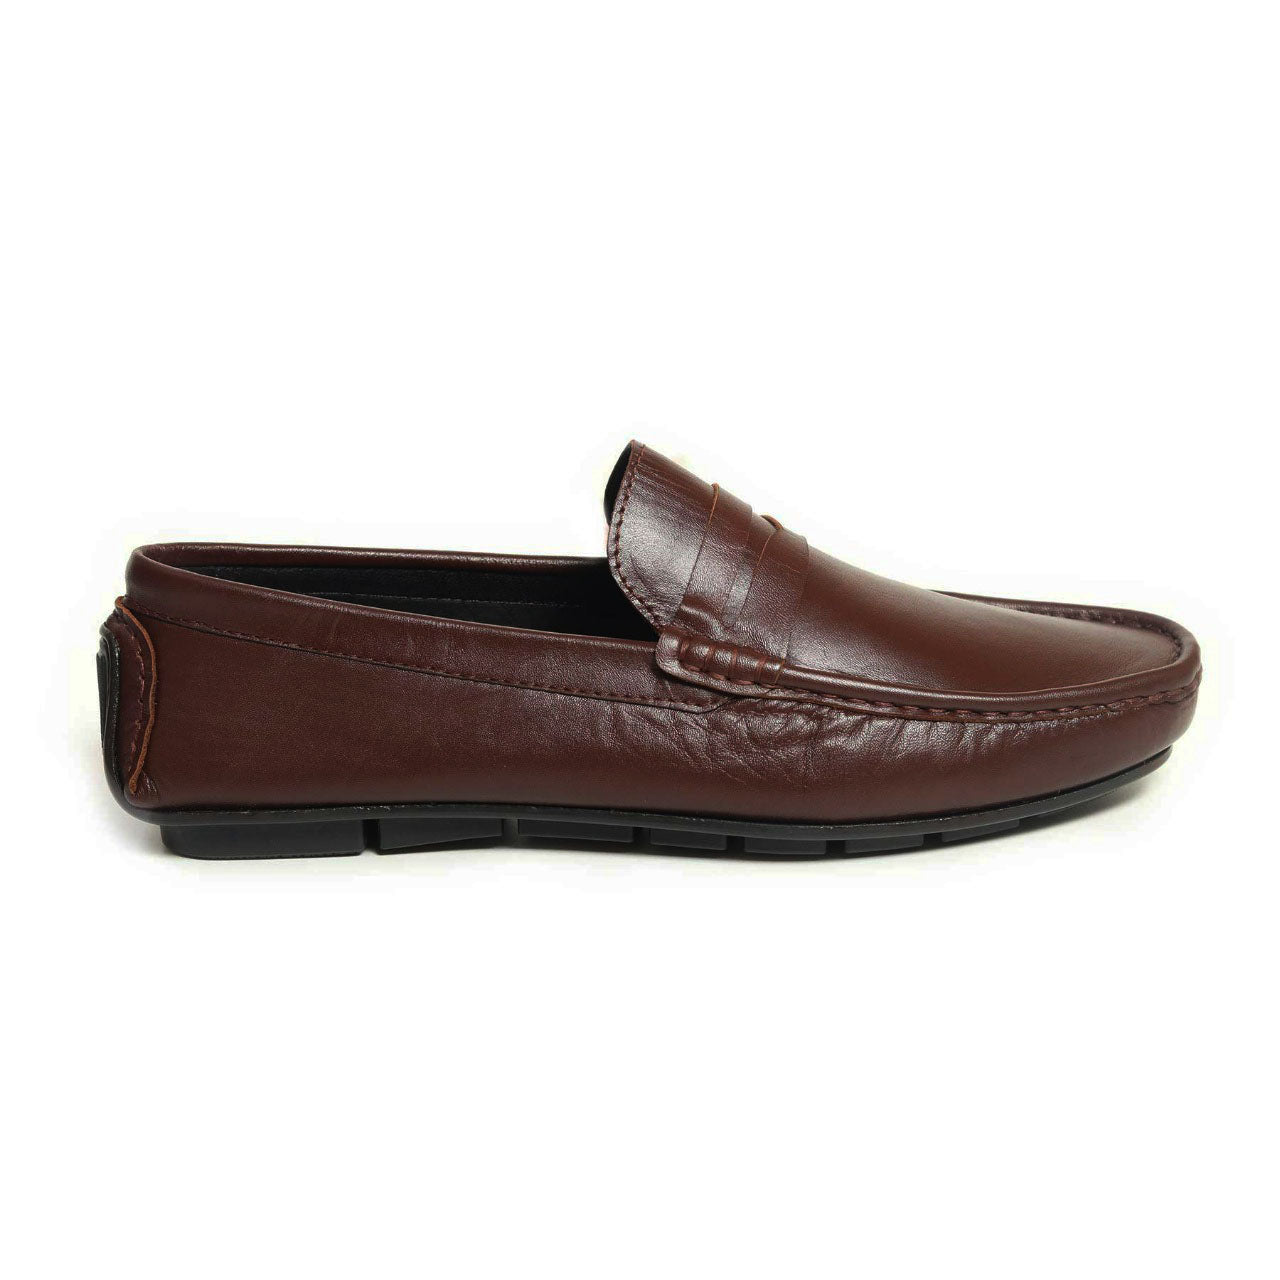 Zays Leather Premium Loafer For Men (Chocolate)- SF72